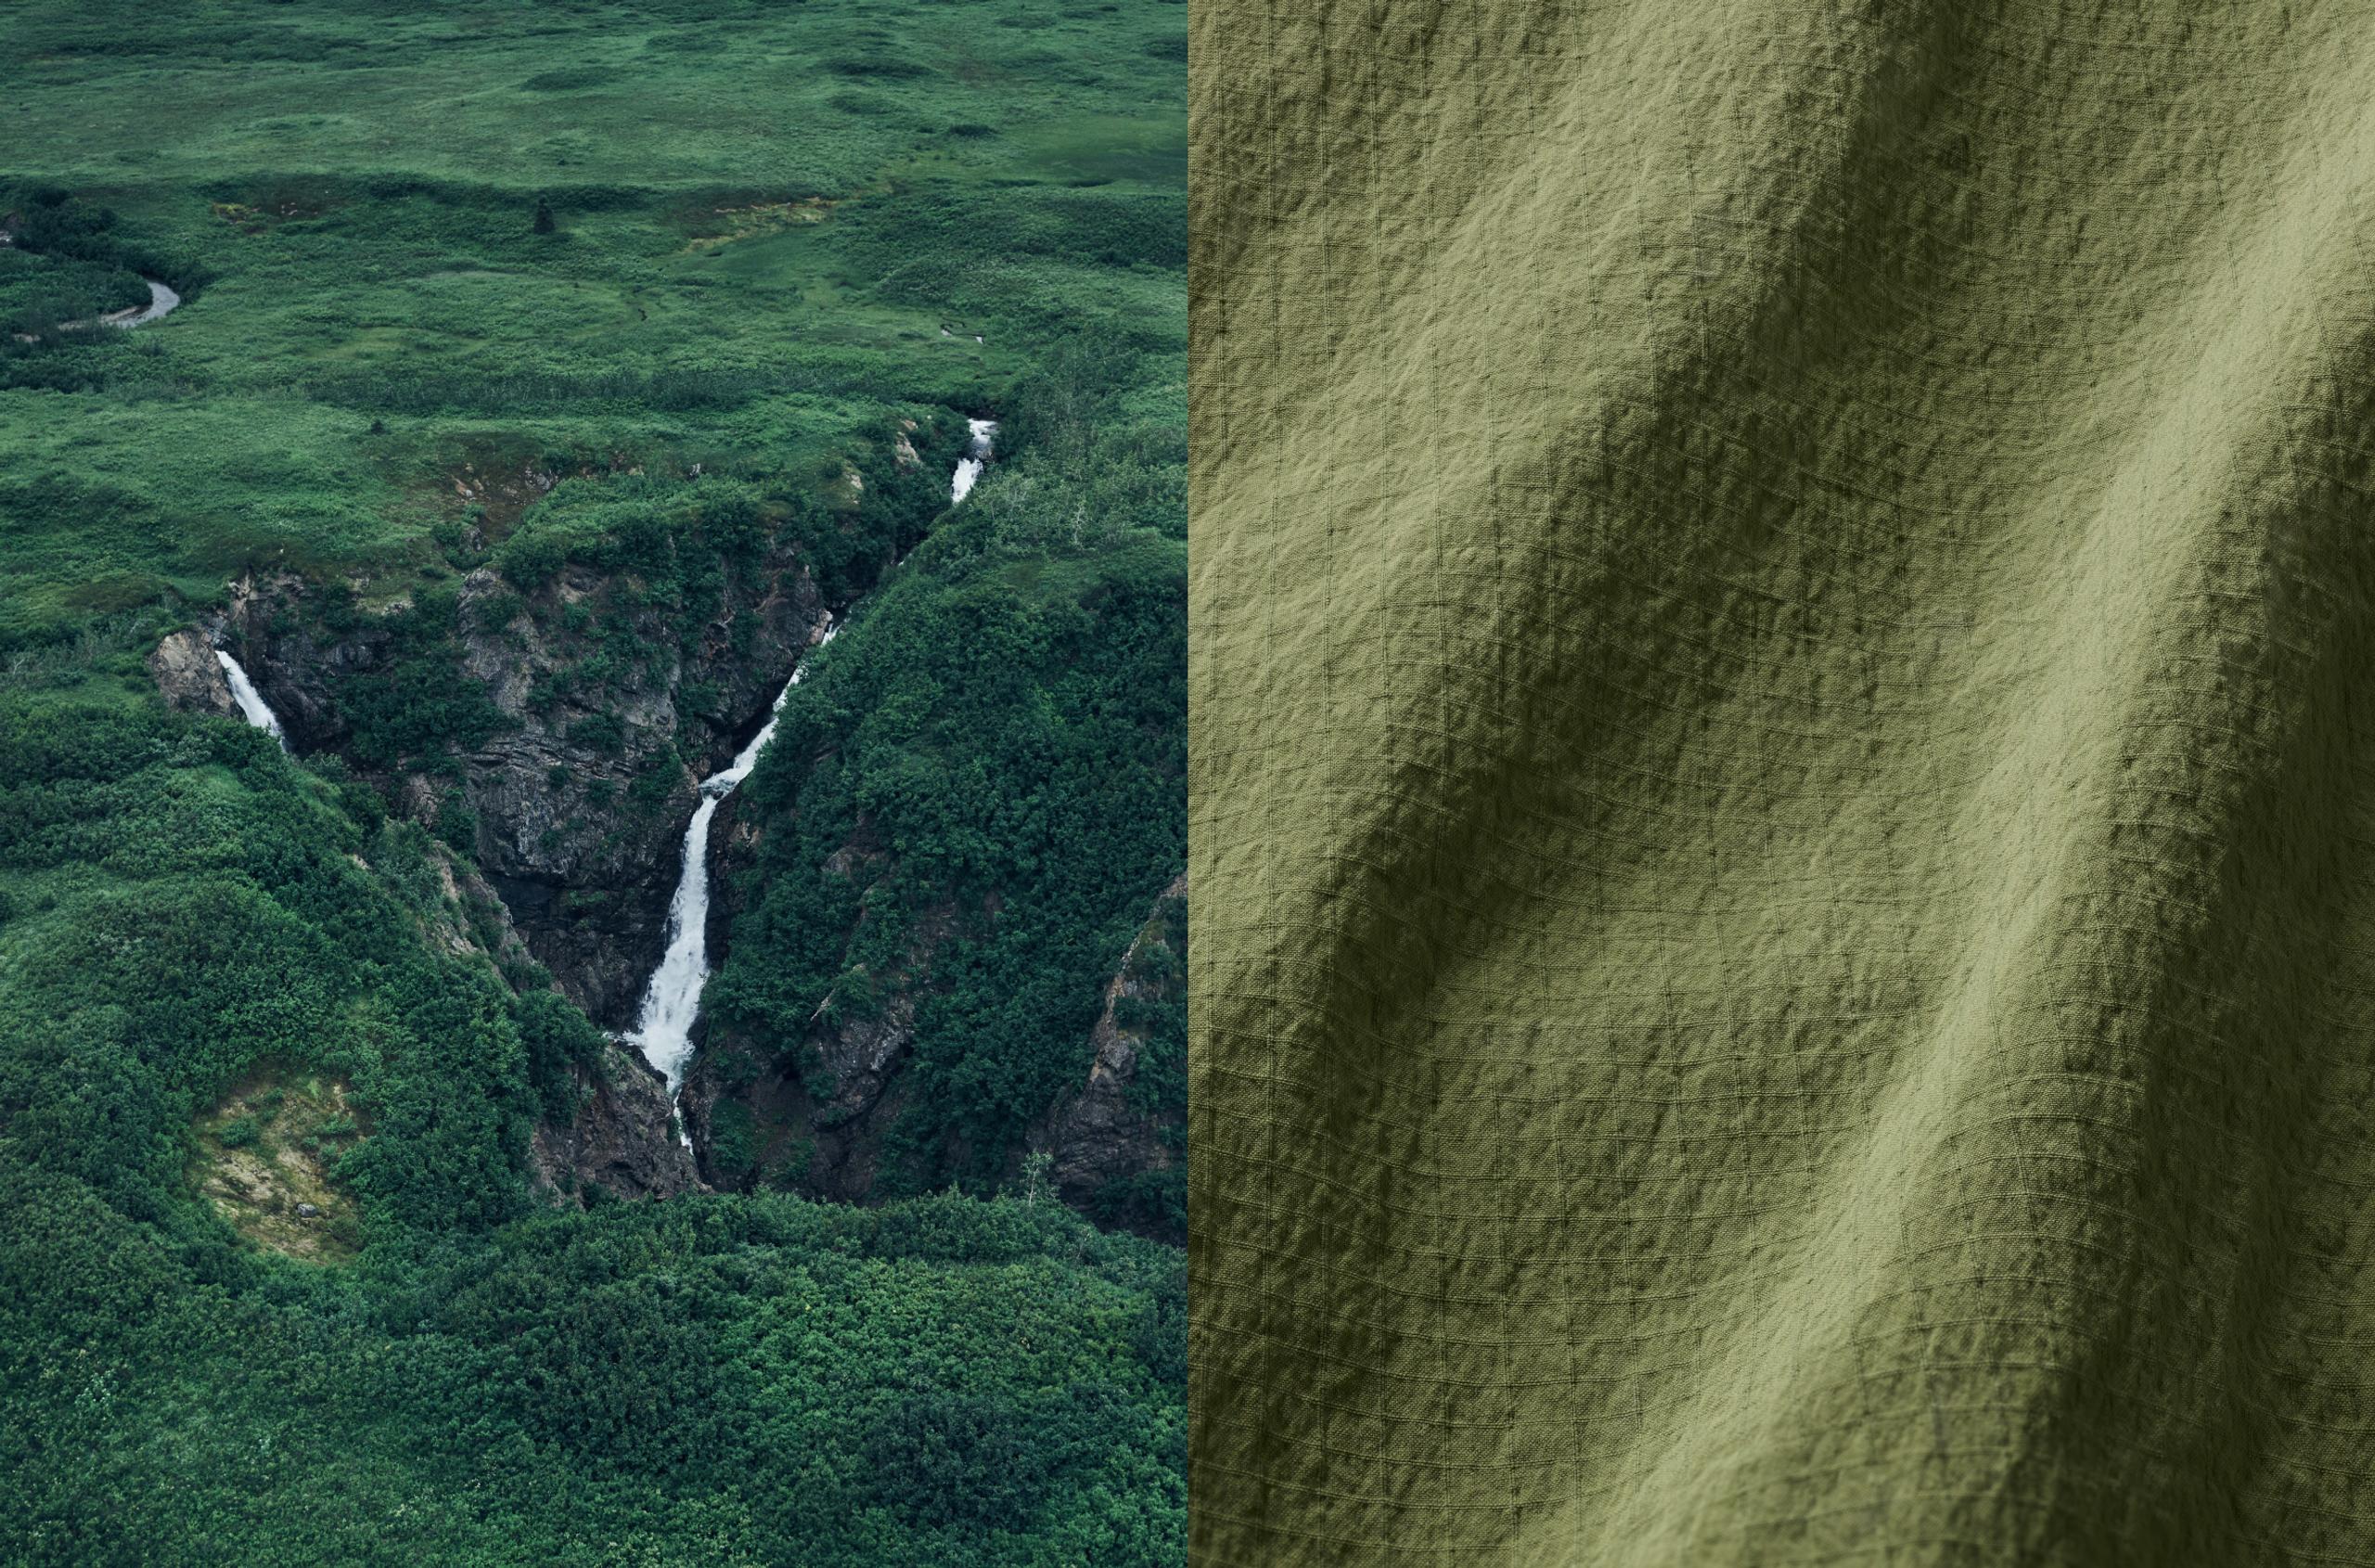 Closeup view of Harrier Anorak fabric juxtaposed next to Alaskan countryside with river